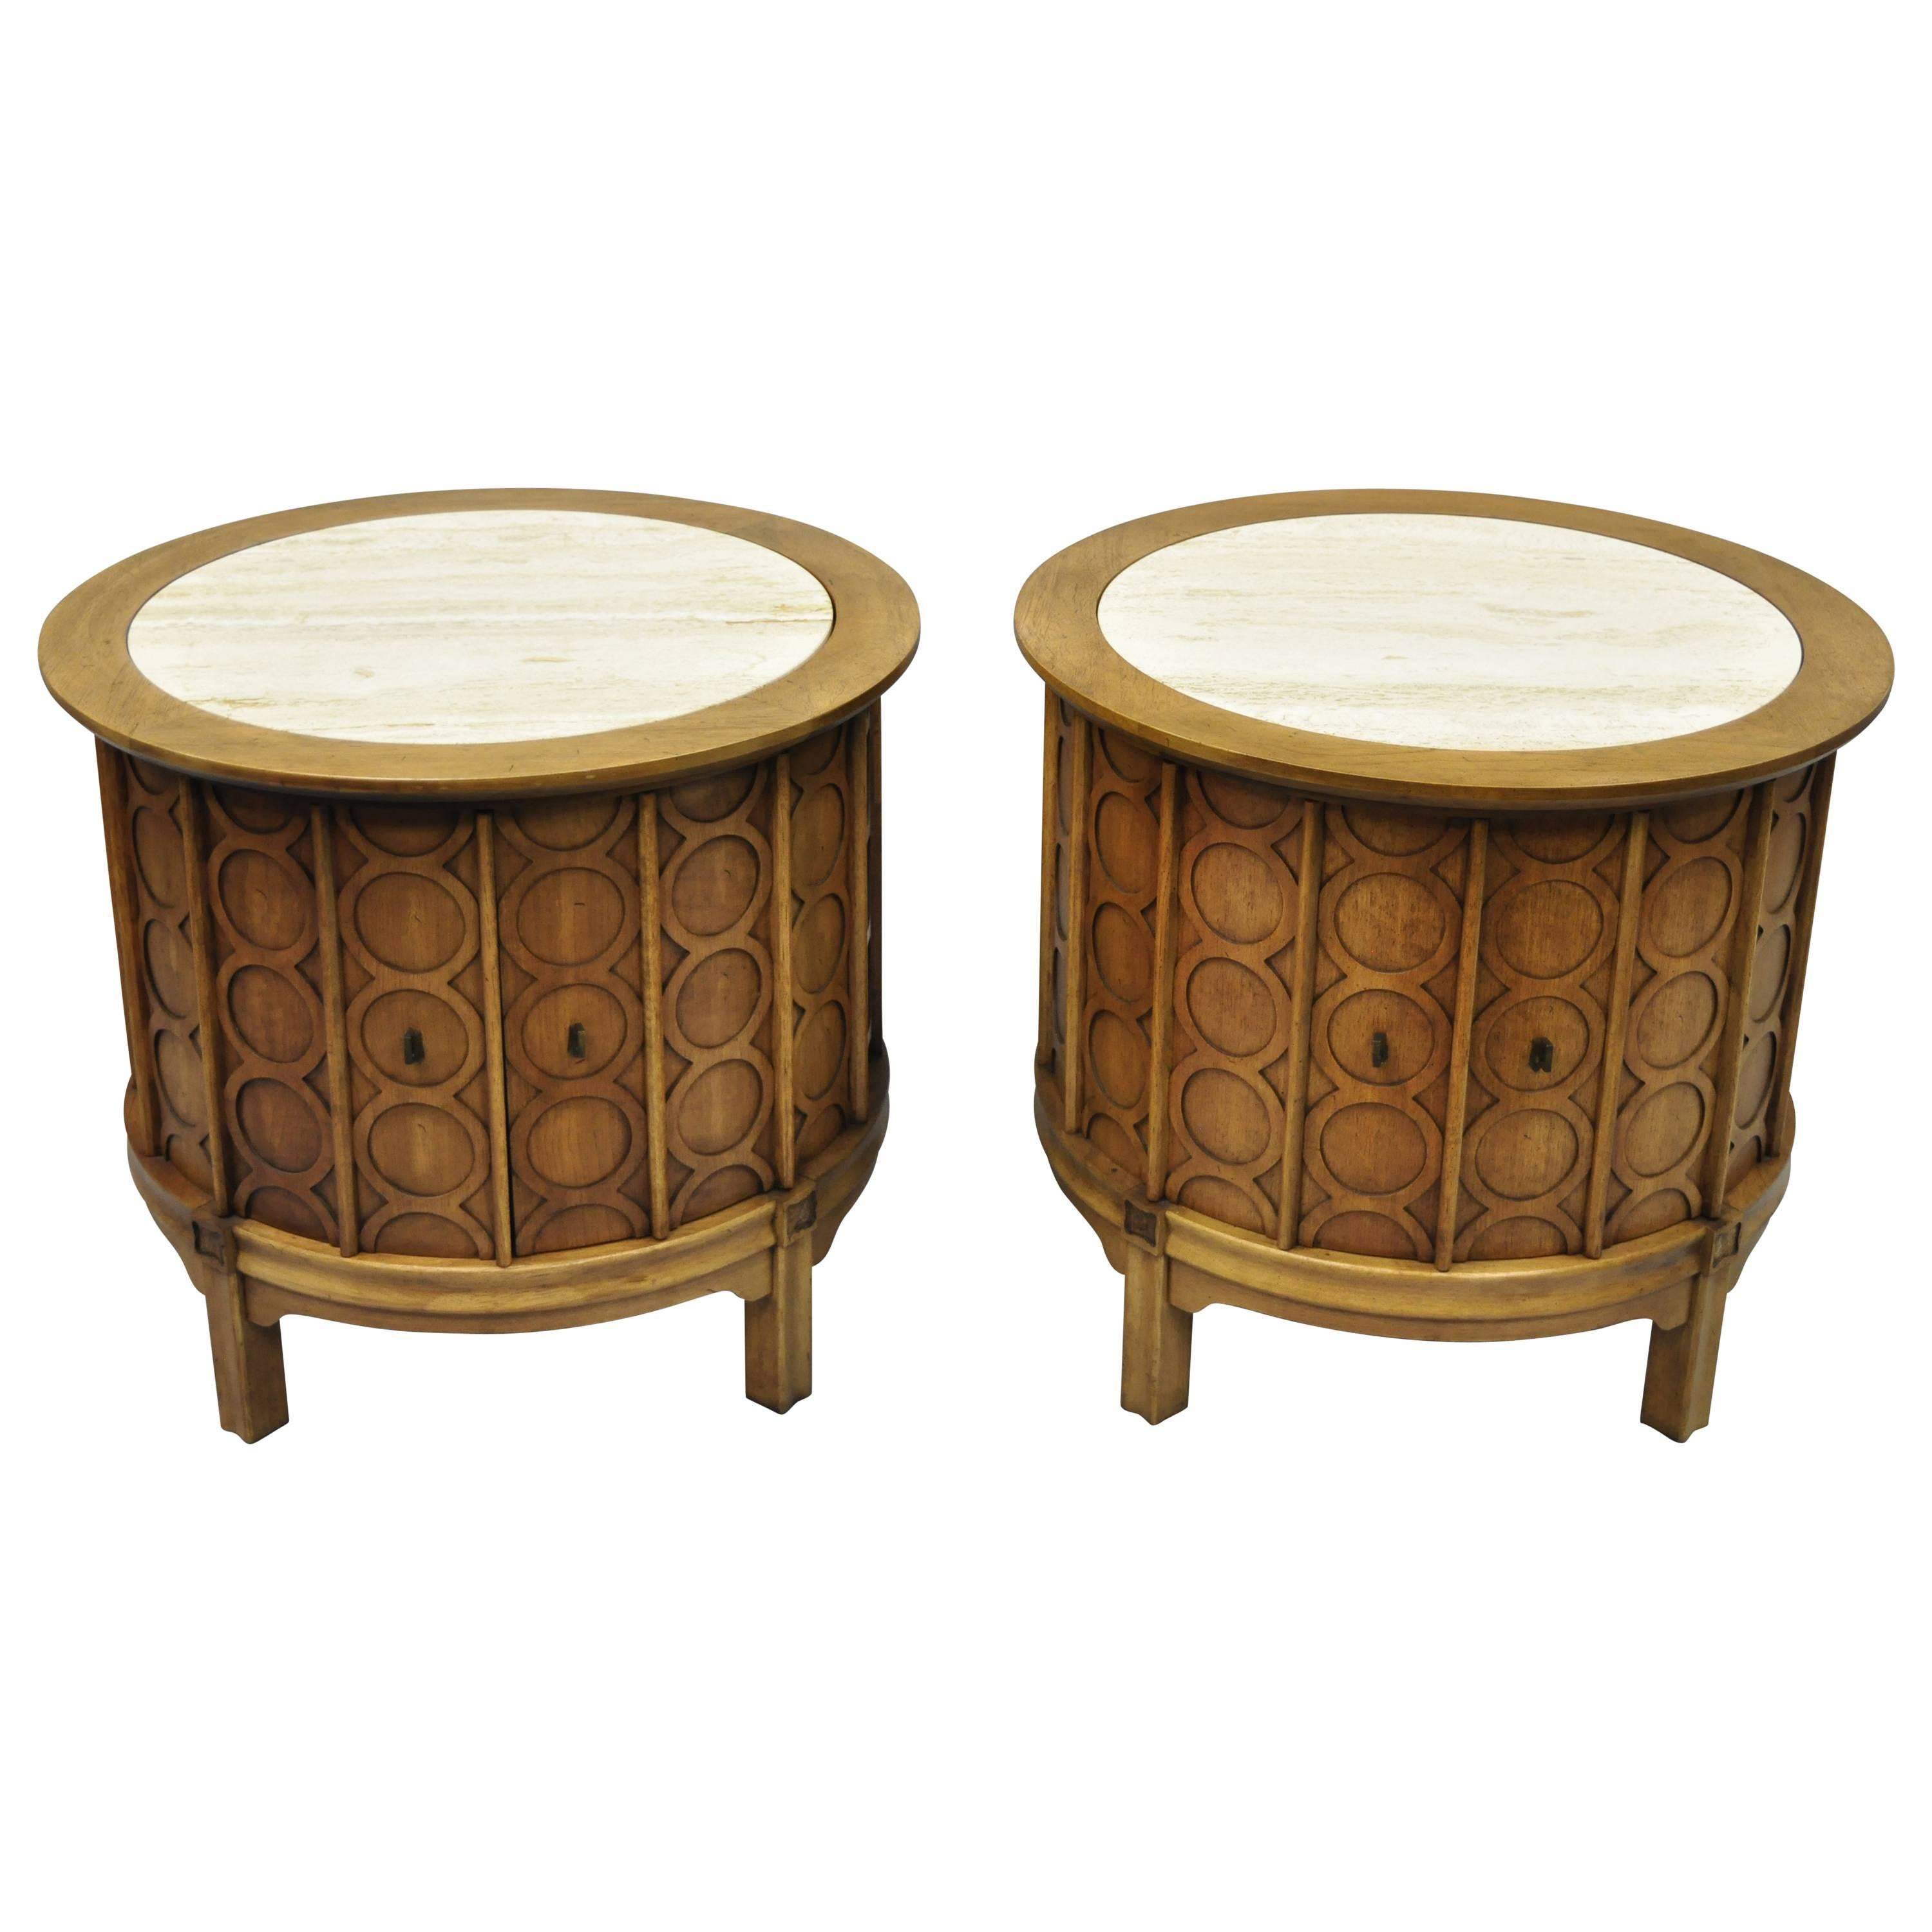 Pair of Thomasville Travertine Top Mid-Century Modern Round Commode End Tables